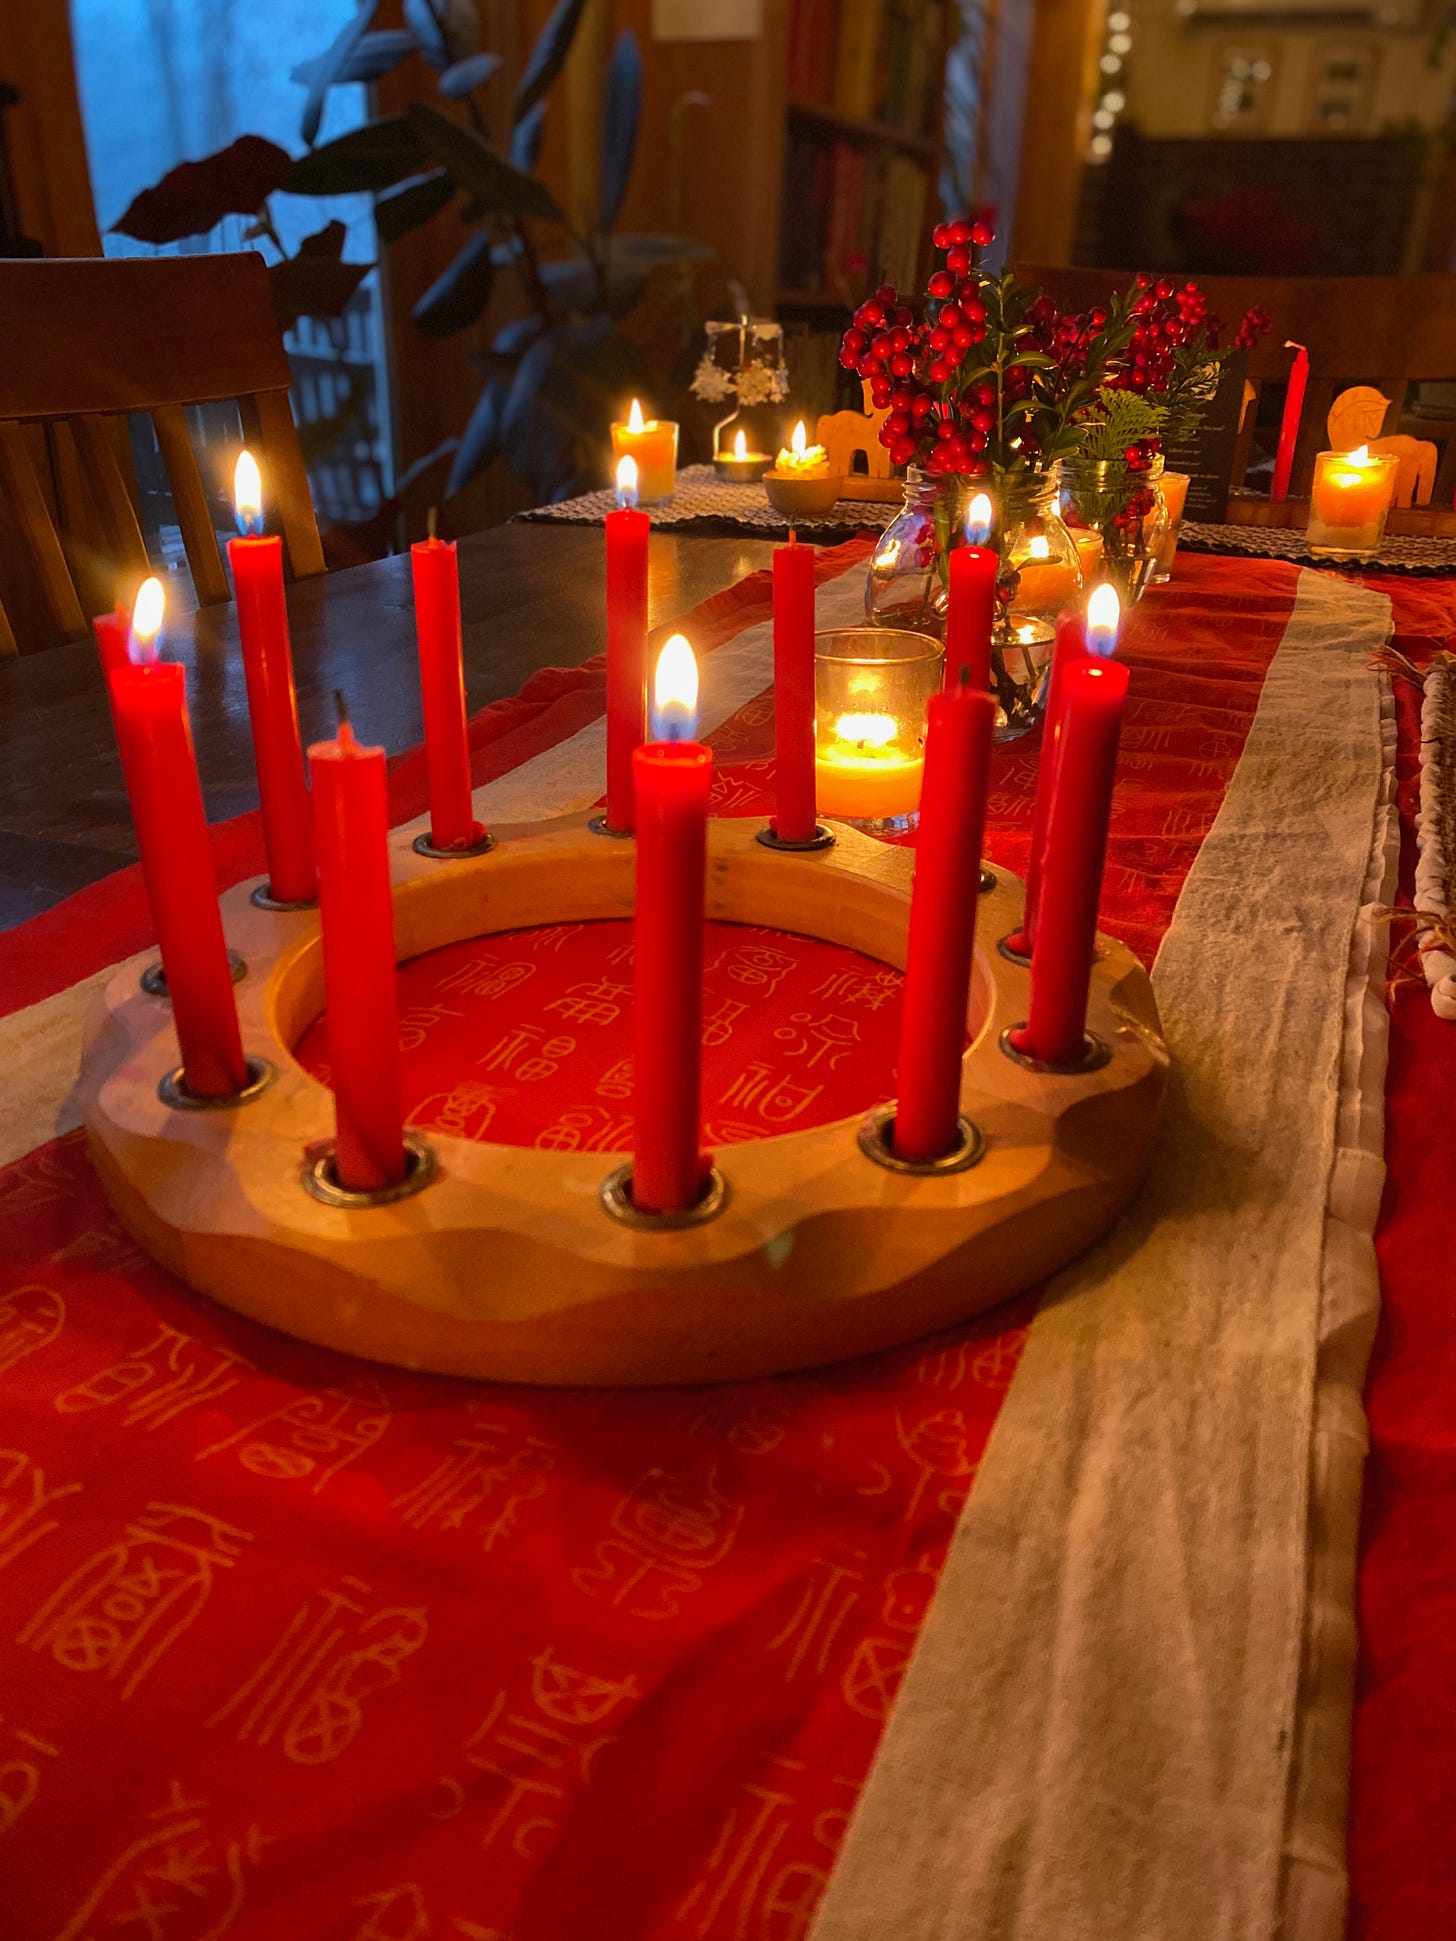 A circular wooden candle holder full of lit red candles sits on a red runner on a wooden table. More lit candles and jars of winterberry are arranged behind it.